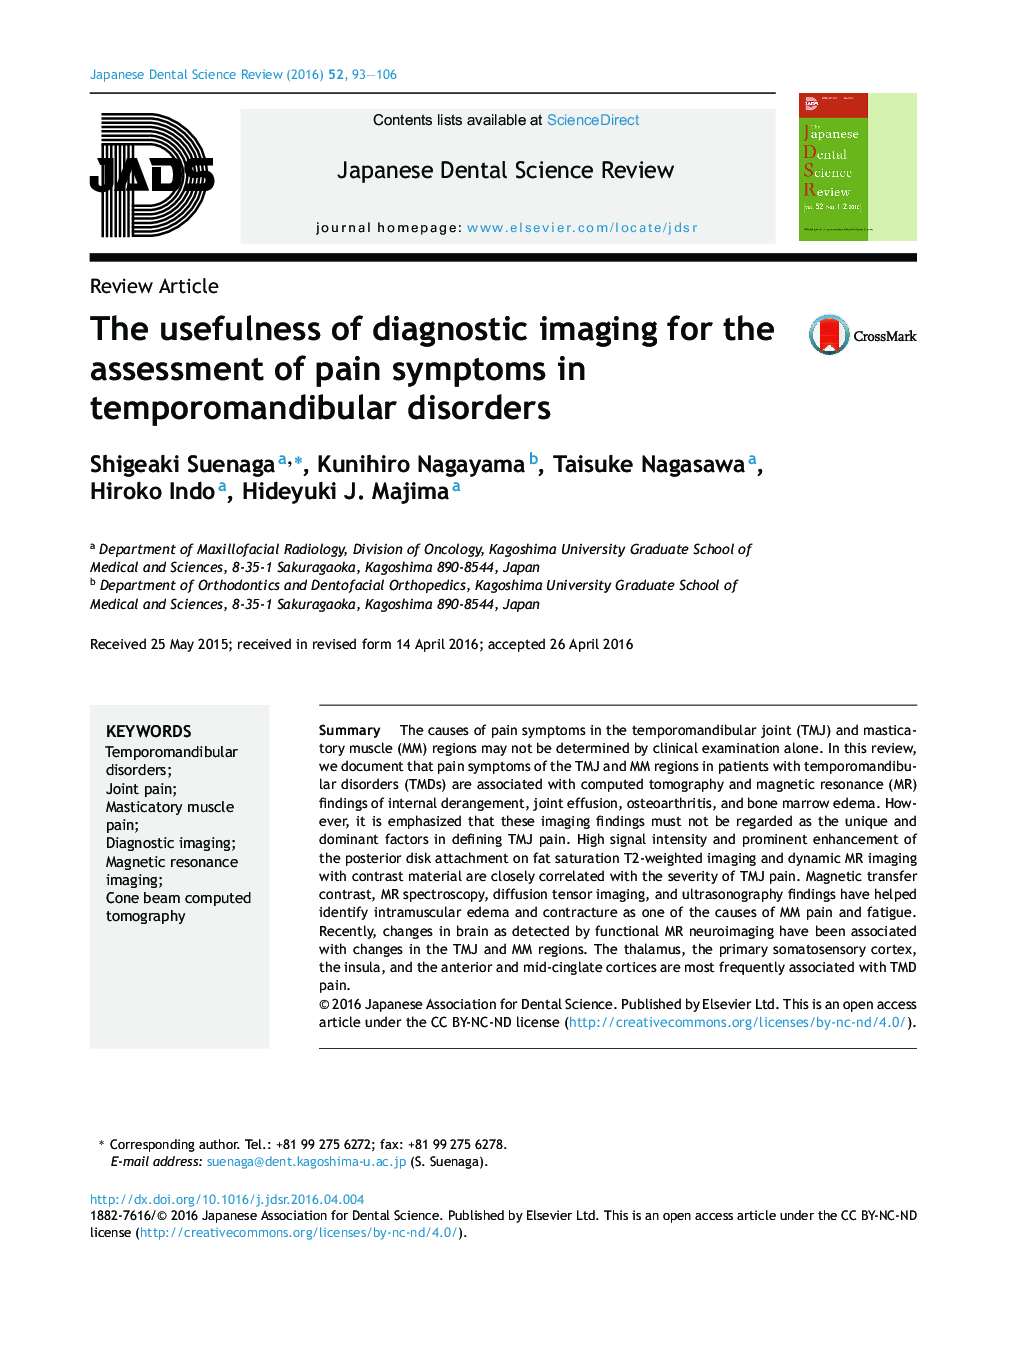 The usefulness of diagnostic imaging for the assessment of pain symptoms in temporomandibular disorders